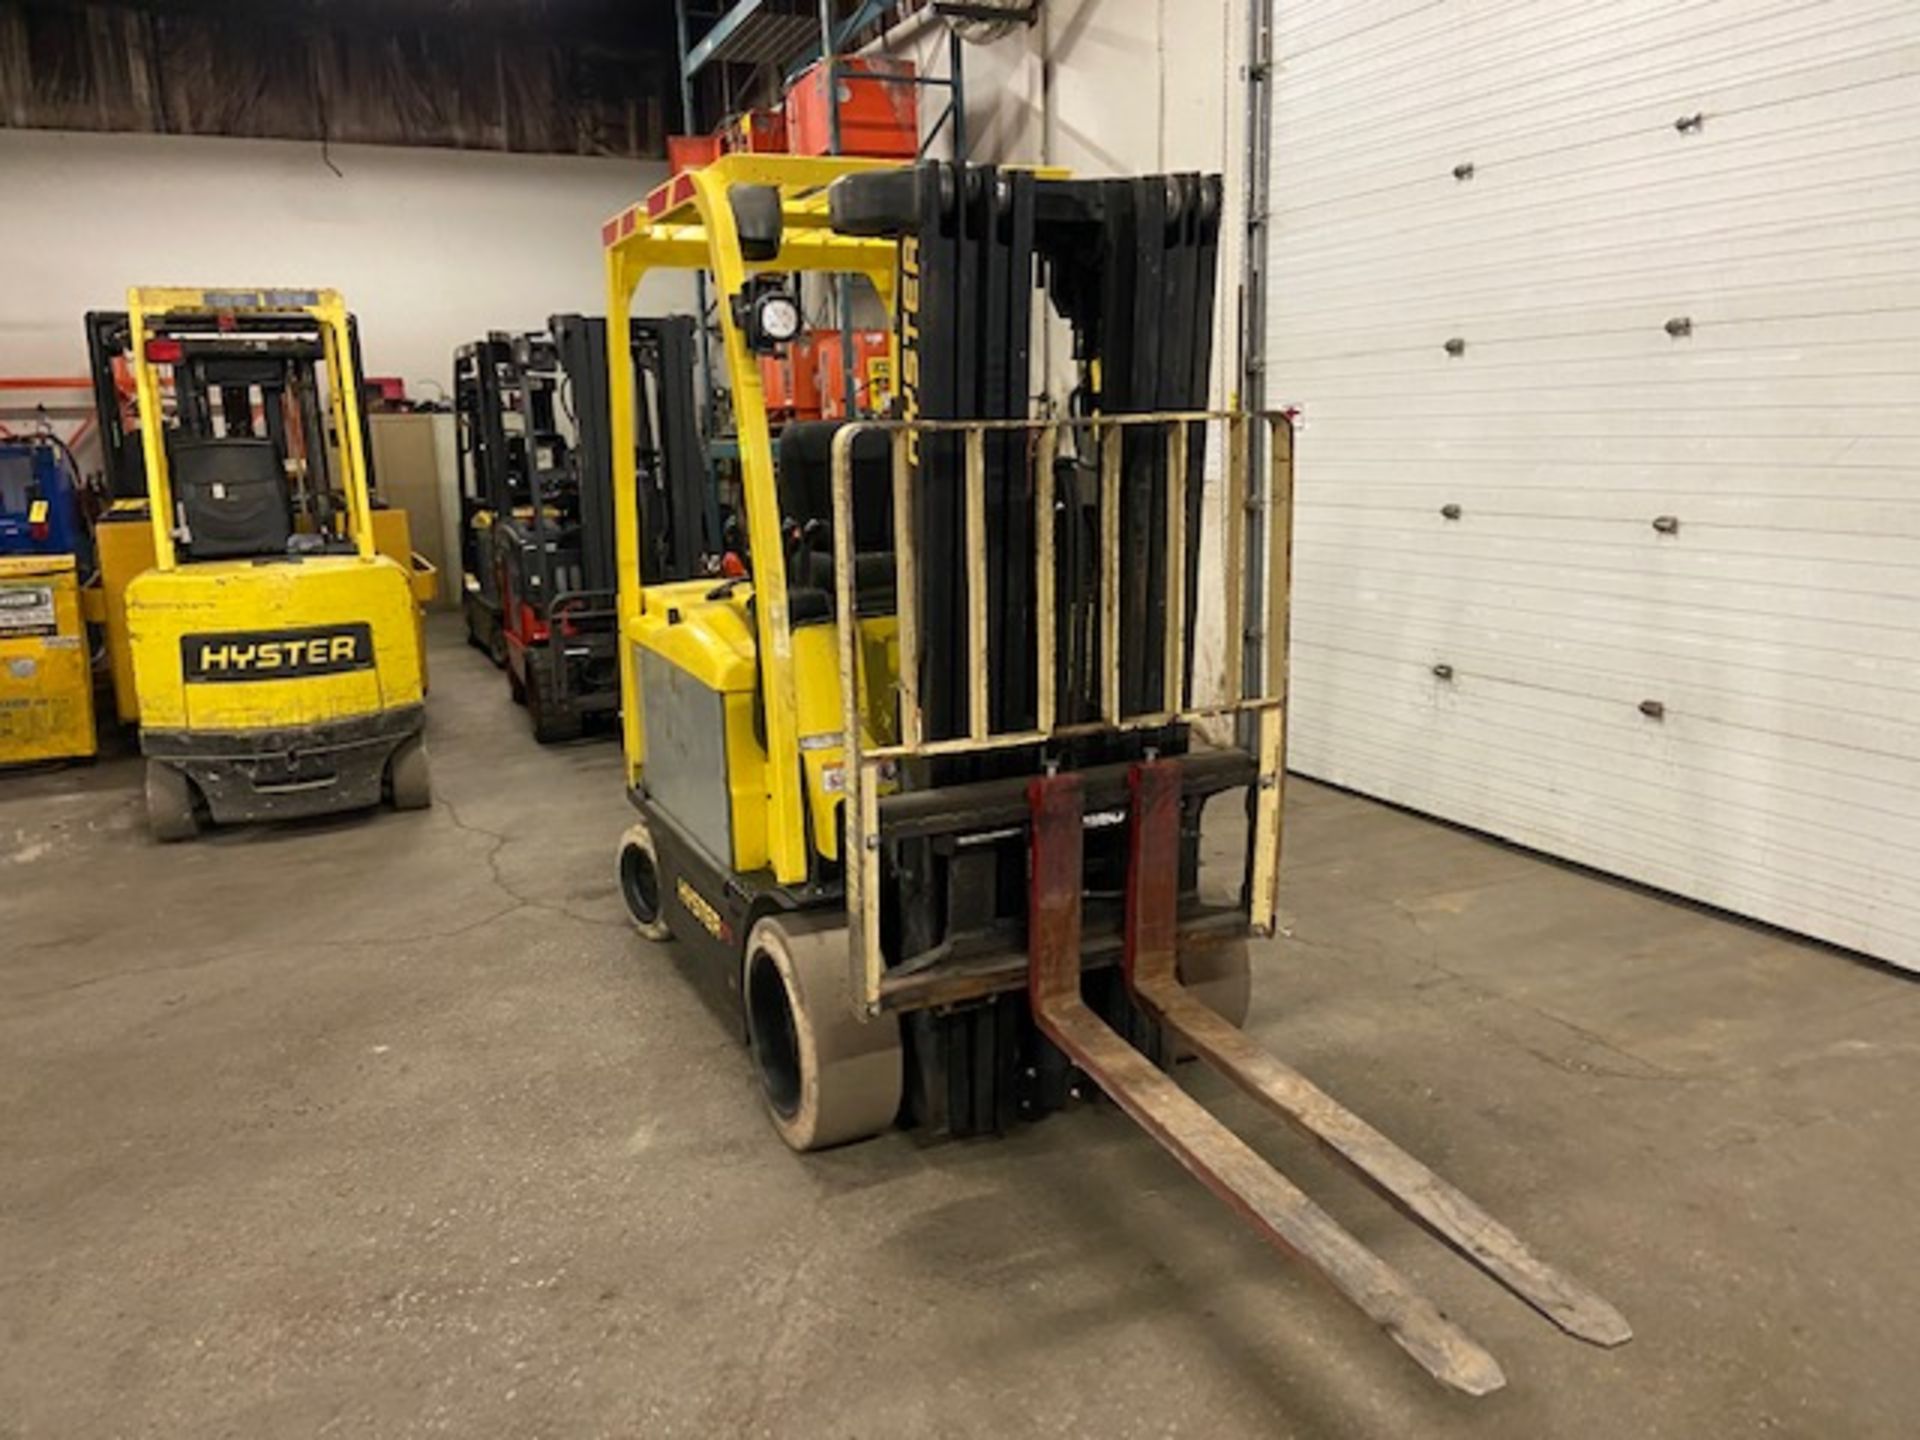 FREE CUSTOMS - 2013 Hyster 6500lbs Capacity Forklift with 4-stage mast - electric with sideshift & - Image 2 of 2